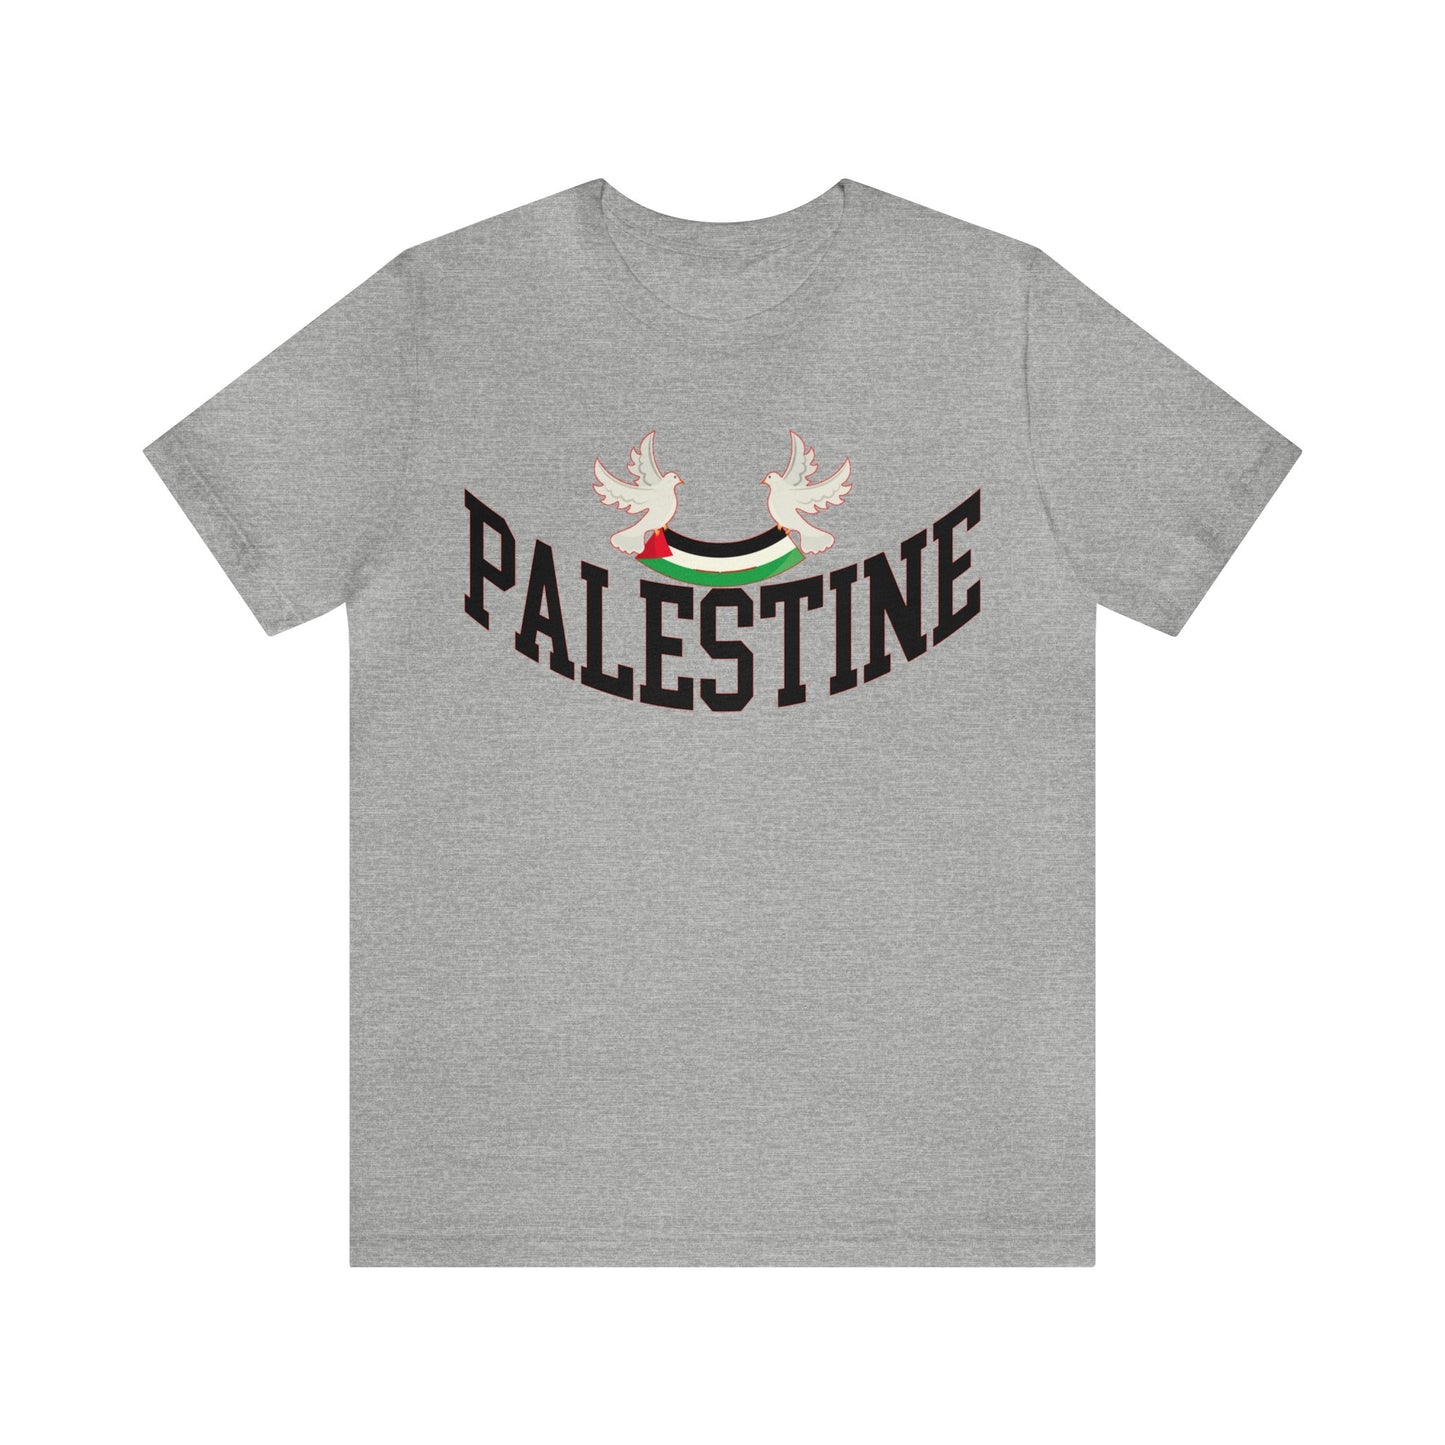 Free Palestine Shirt, All Profit Support Palestine, Free Palestine Sweater, Palestine Flag Crewneck, Stand With Palestine Shirt, T1366